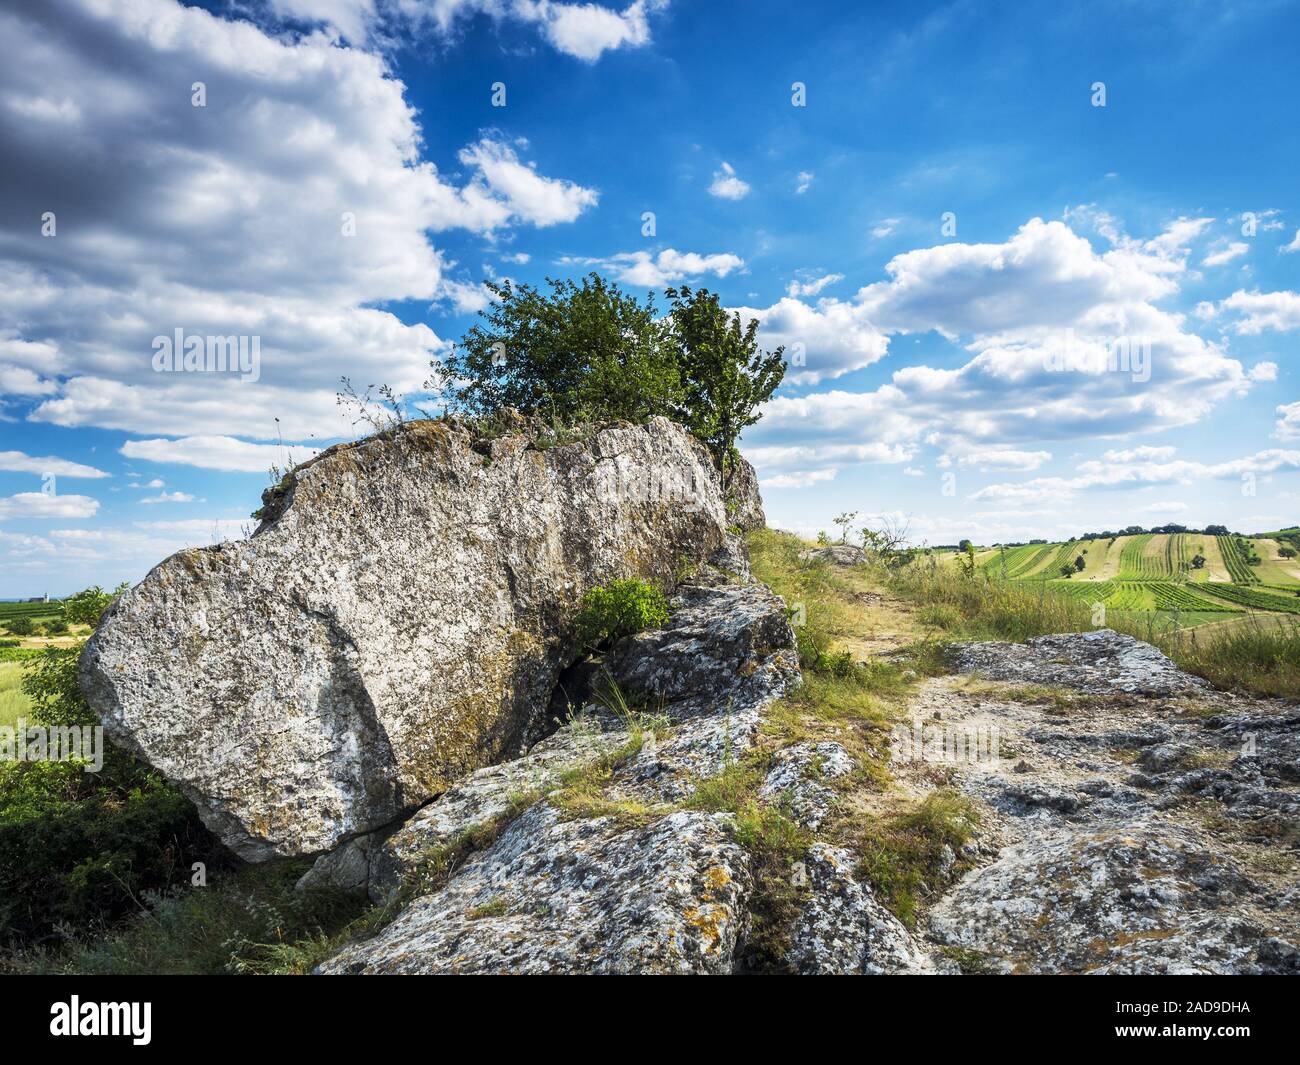 giant boulder with cherrytree in Burgenland Austria Stock Photo